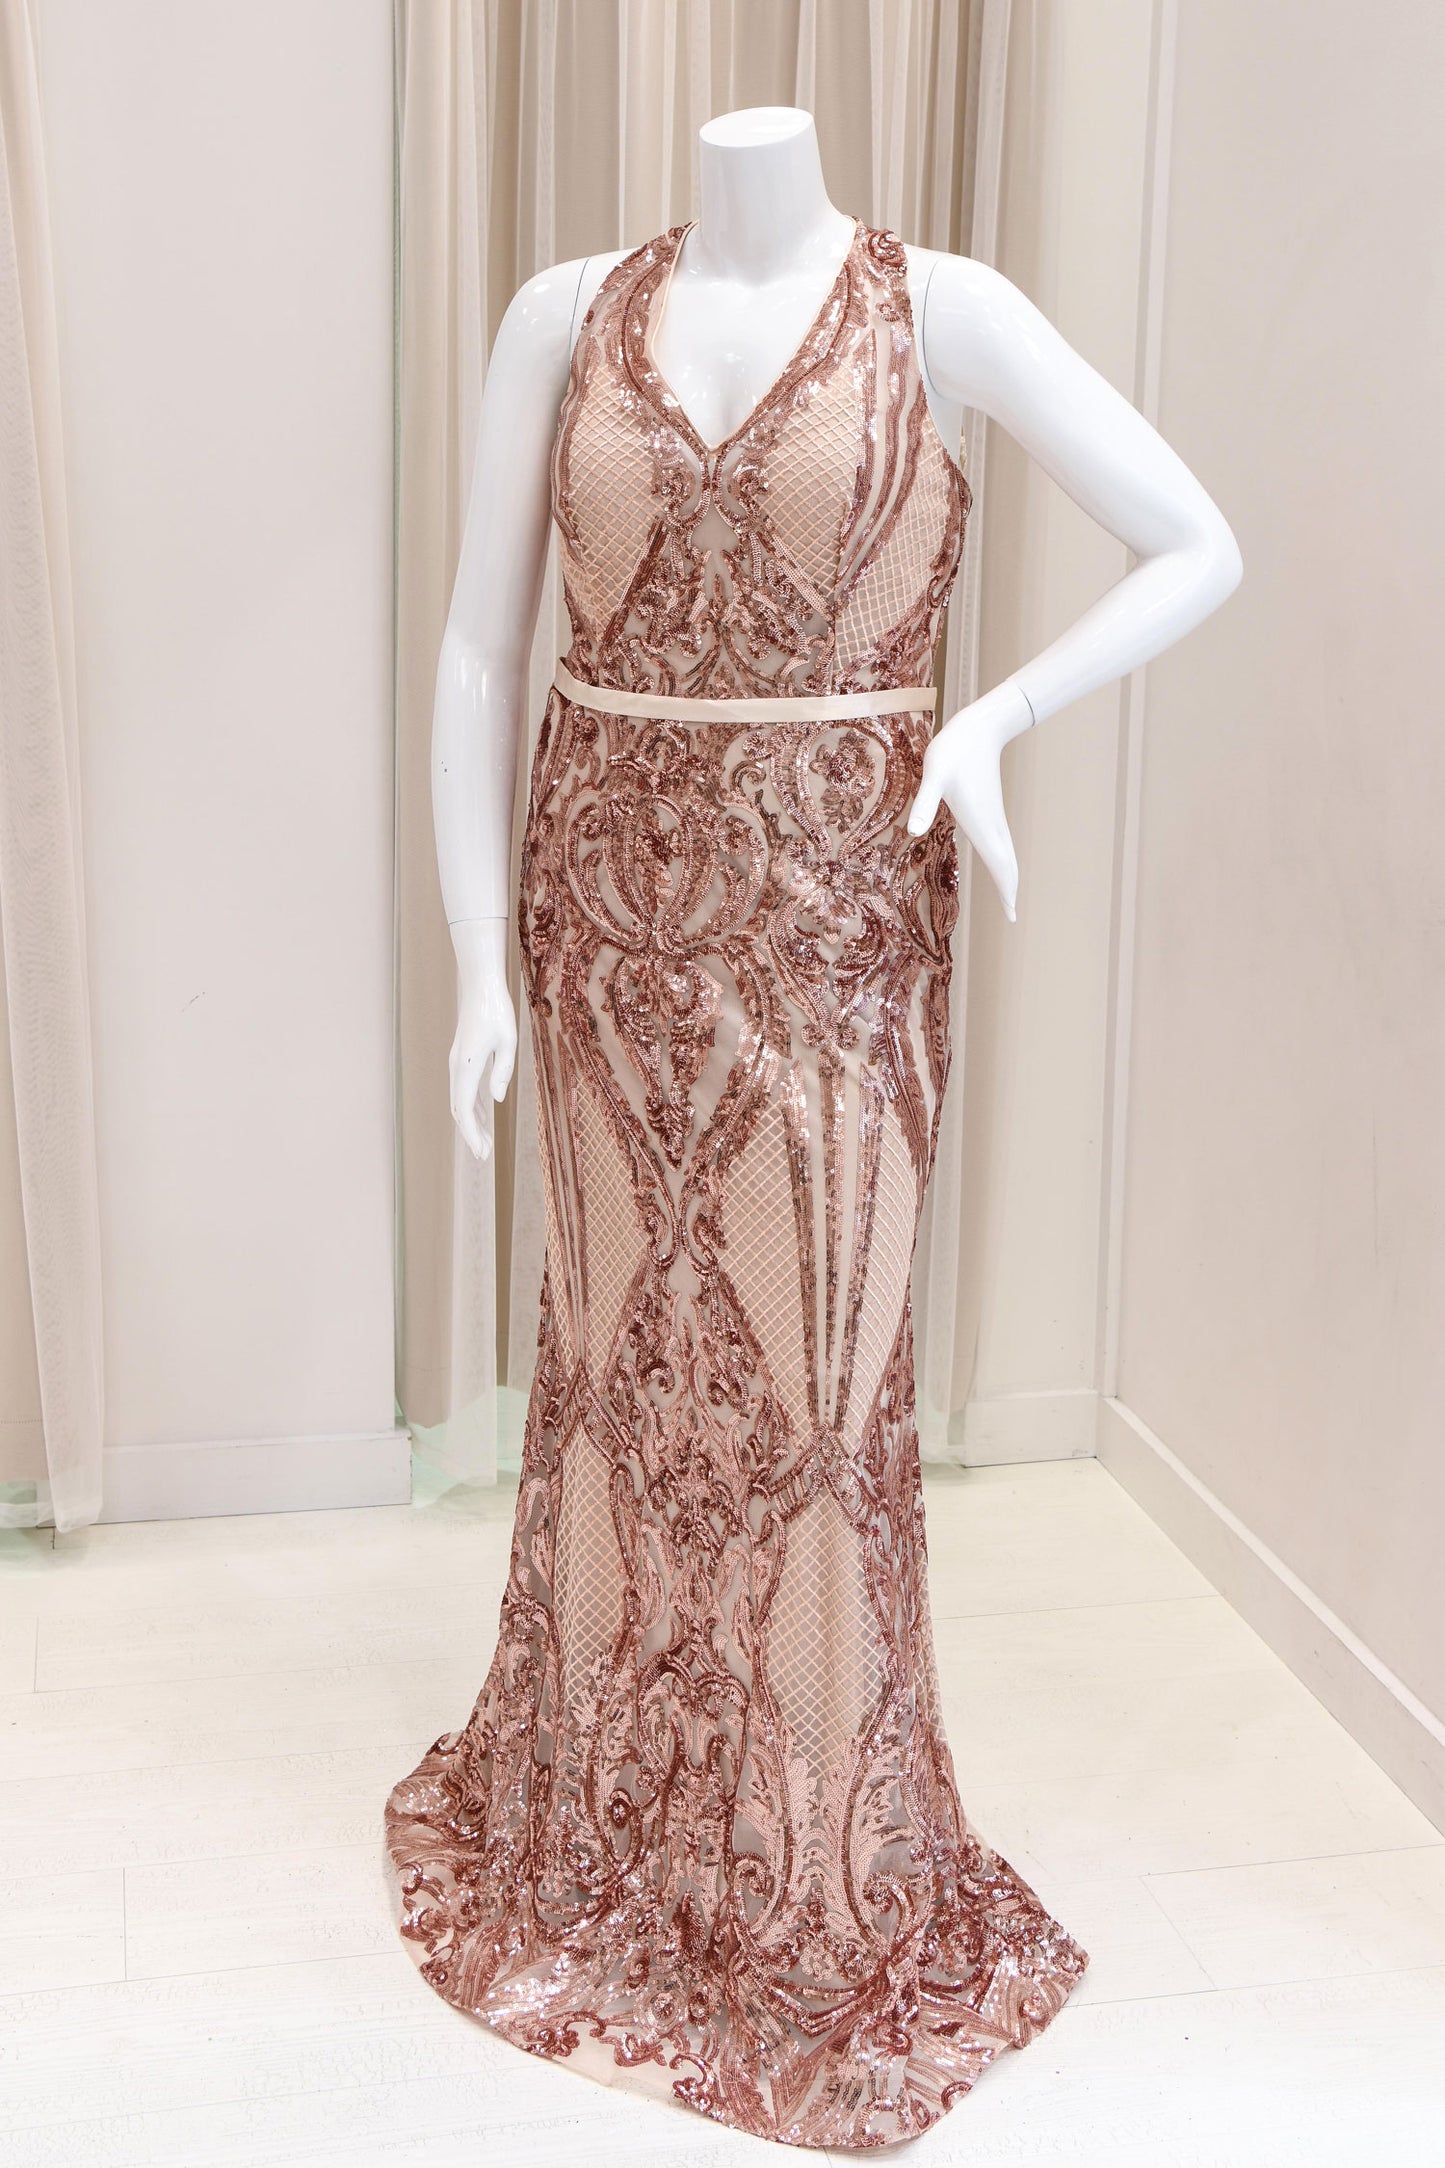 Dalenna Sequin Evening Gown in Rose Gold